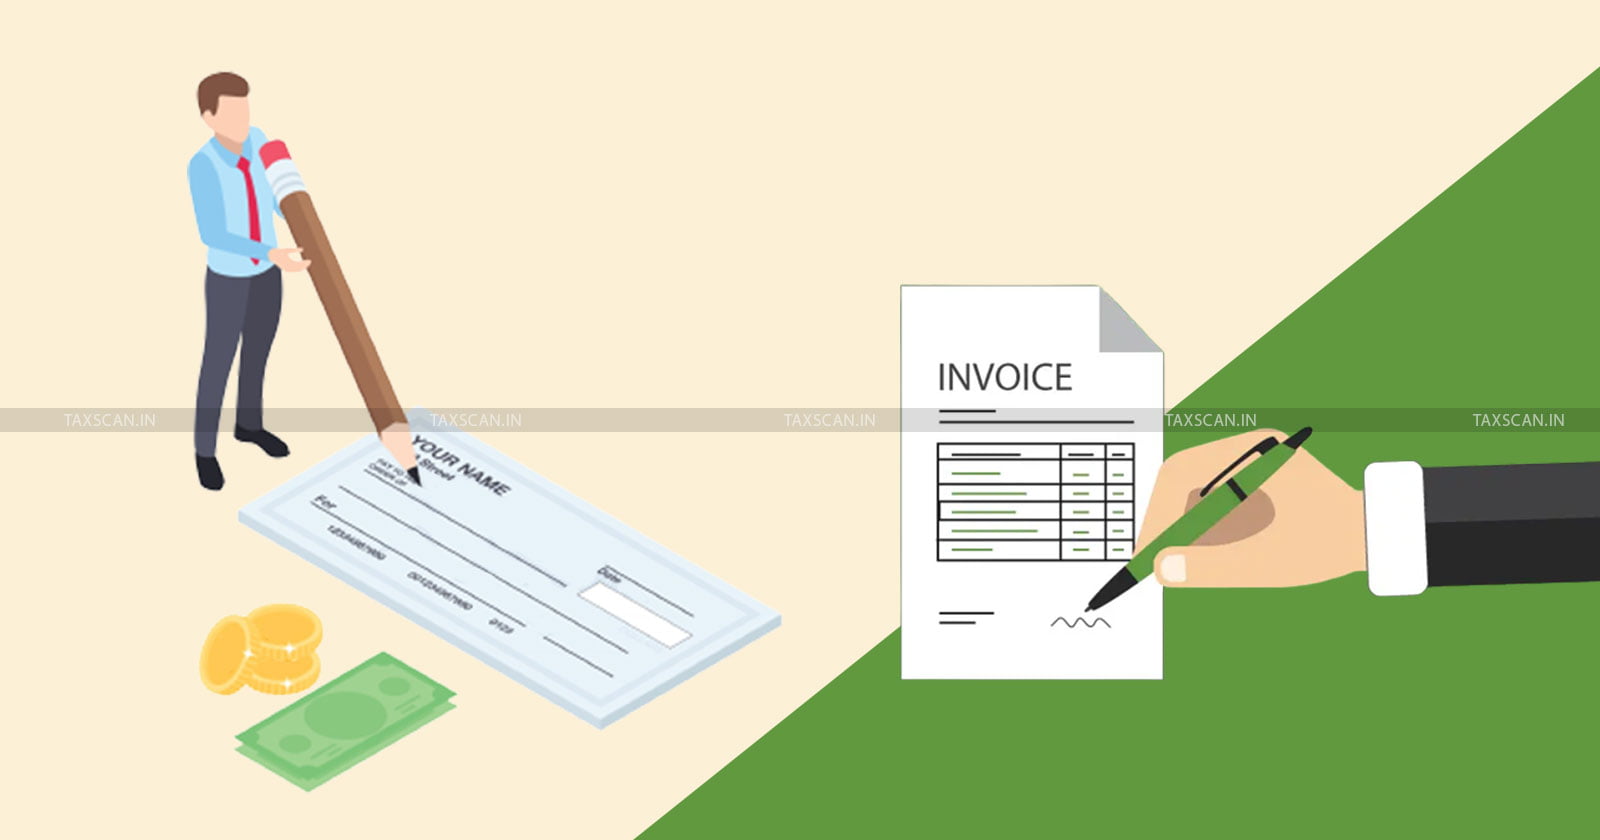 Payee - Cheque - and - Copies - of - Invoices - ngenuineness - Transactions - SC - ITC - Claim - TAXSCAN